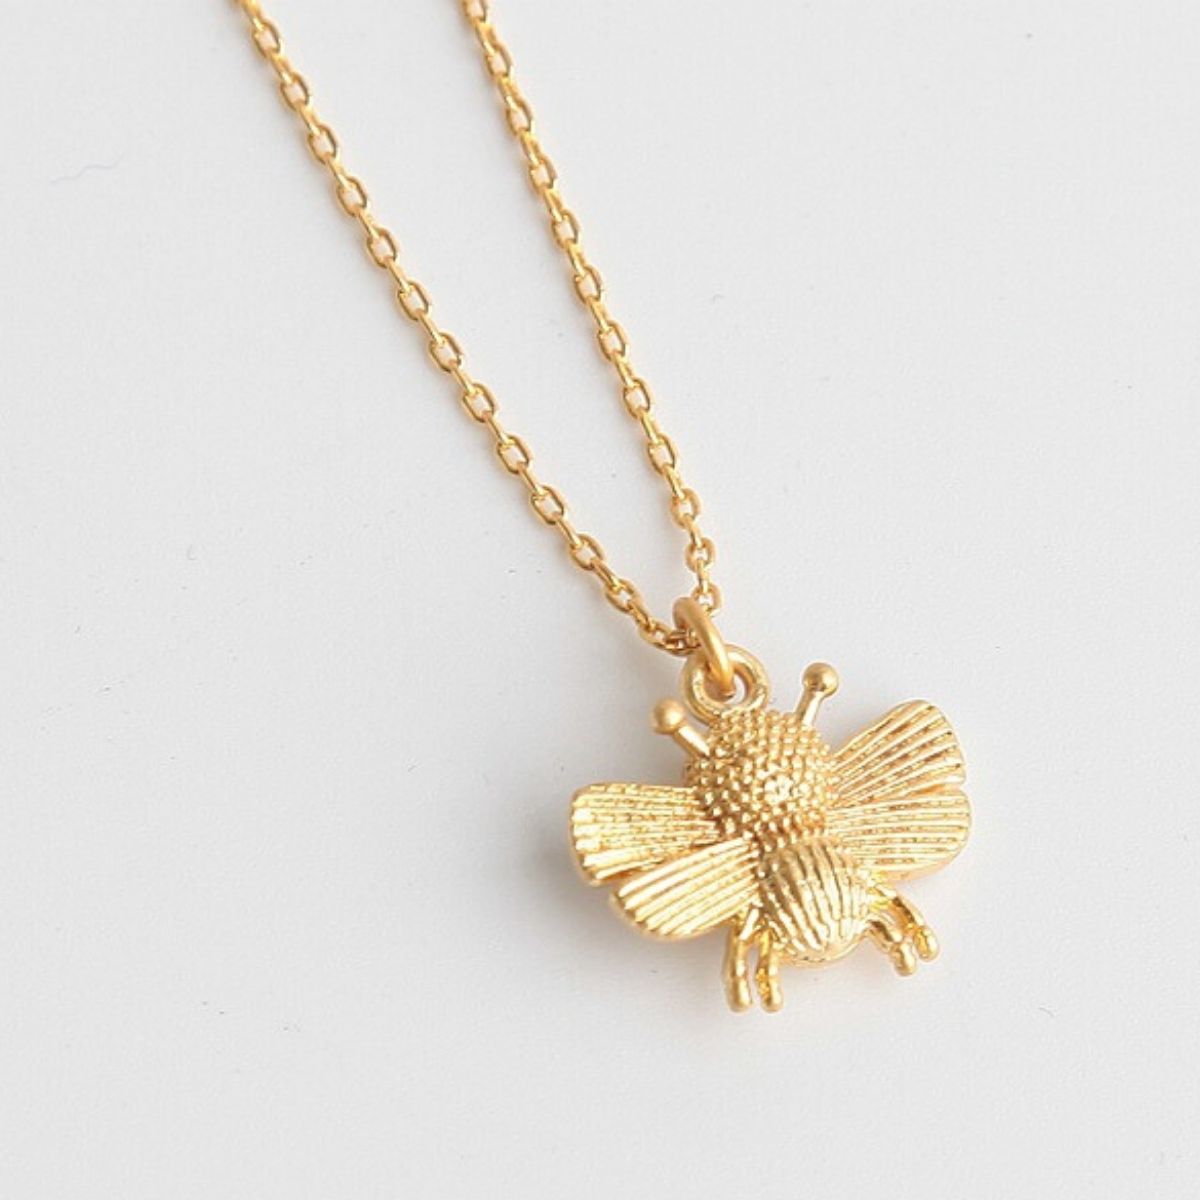 Kate Spade Pave Crystal Bumble Bee Necklace | Bumble bee necklace, Bee  necklace, Kate spade jewelry necklace